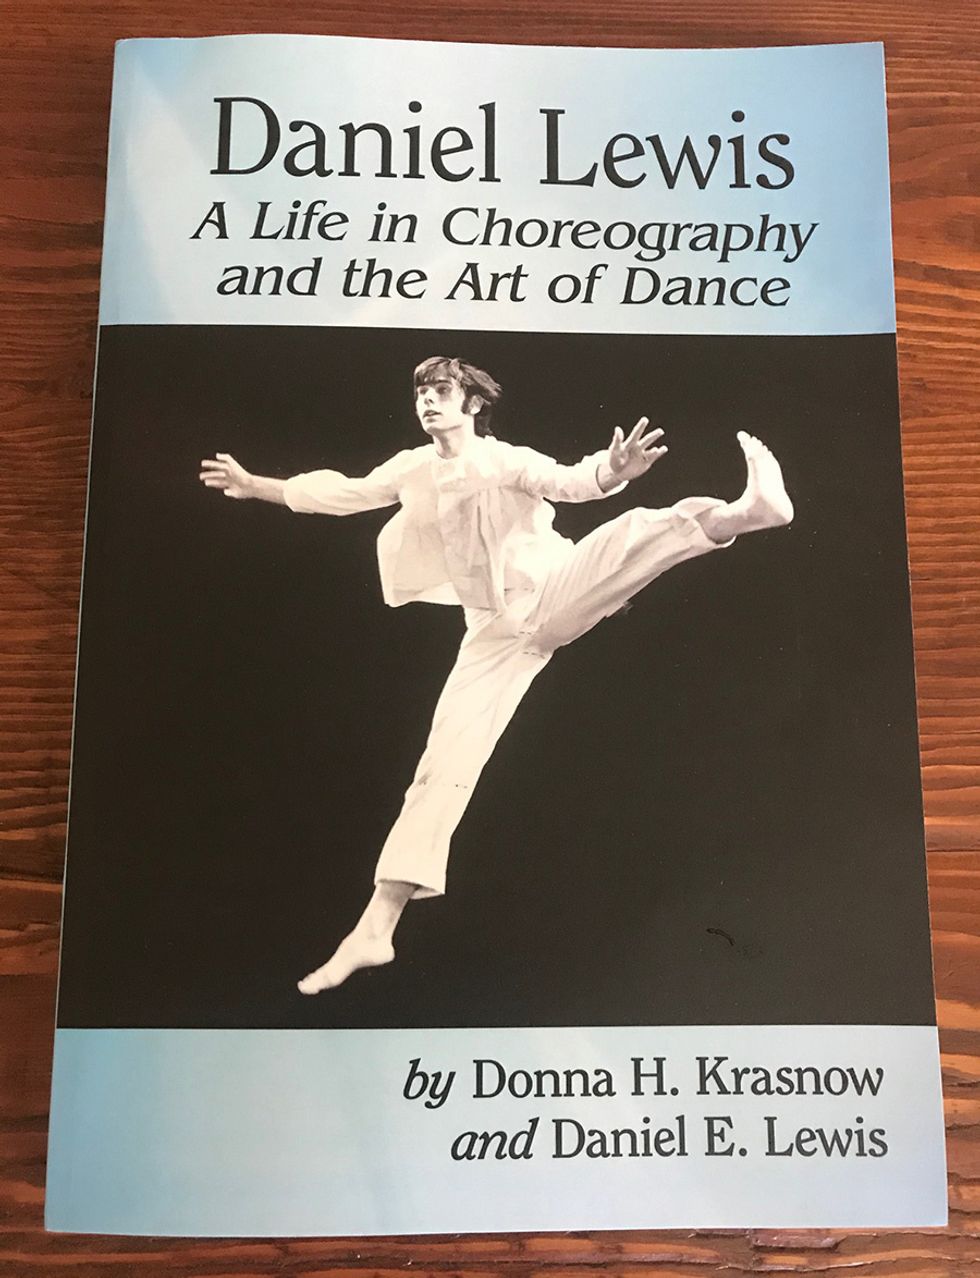 The cover of the book, featuring a black and white photo of Lewis jumping